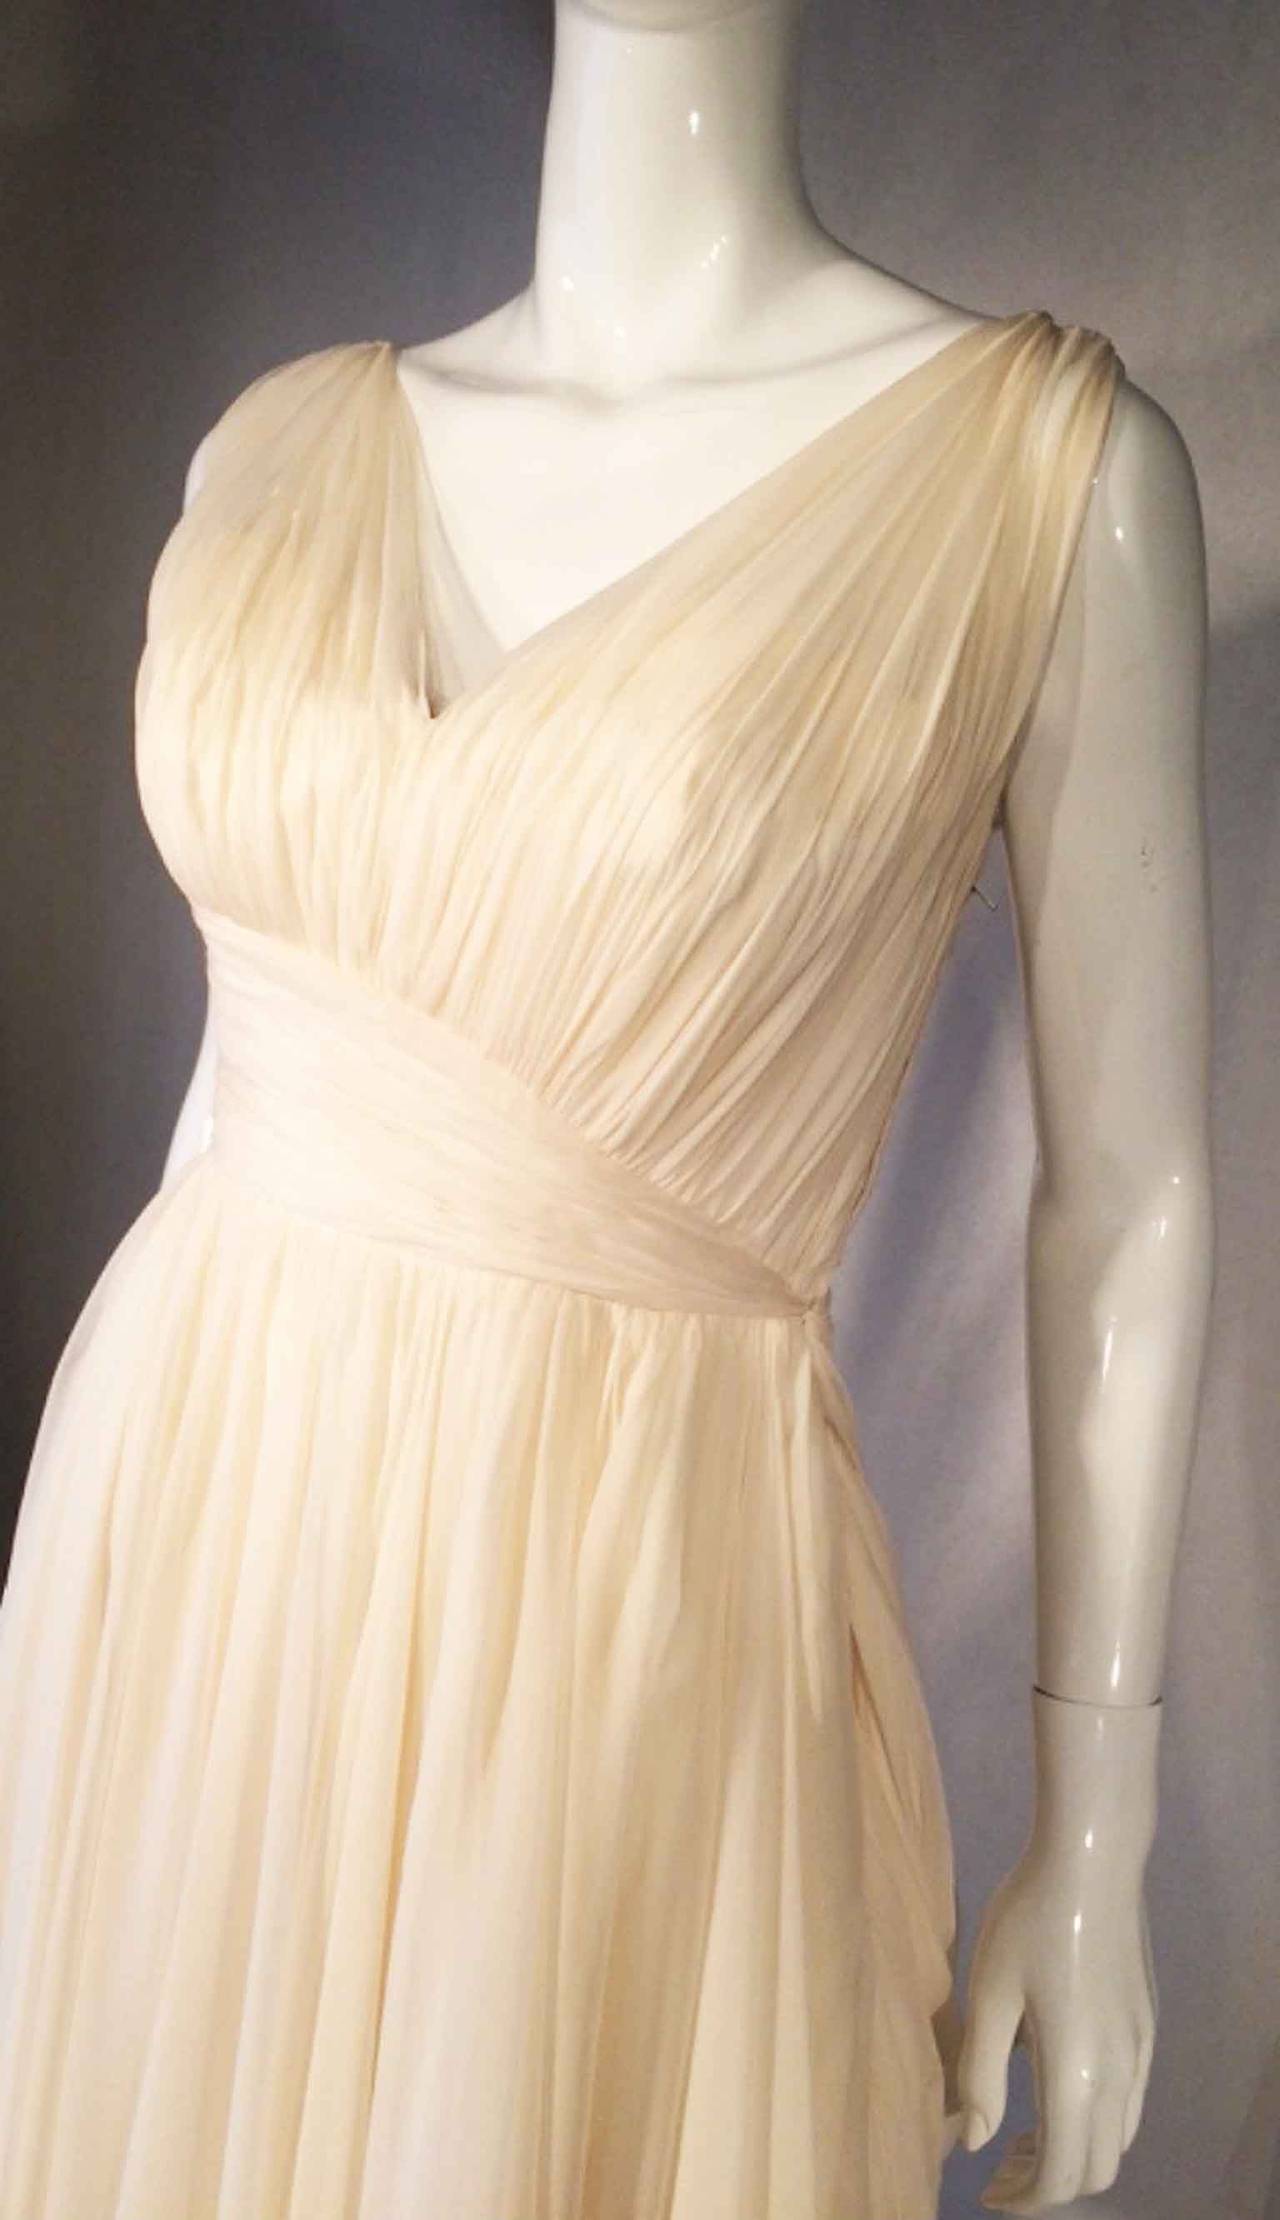 A fine and rare vintage Jean Desses haute couture cocktail dress. Hand constructed multi-layered ivory white silk chiffon item features a sculpted boned bodice, shoulder straps and draped skirt panels. Item fully lined with metal zipper up side.